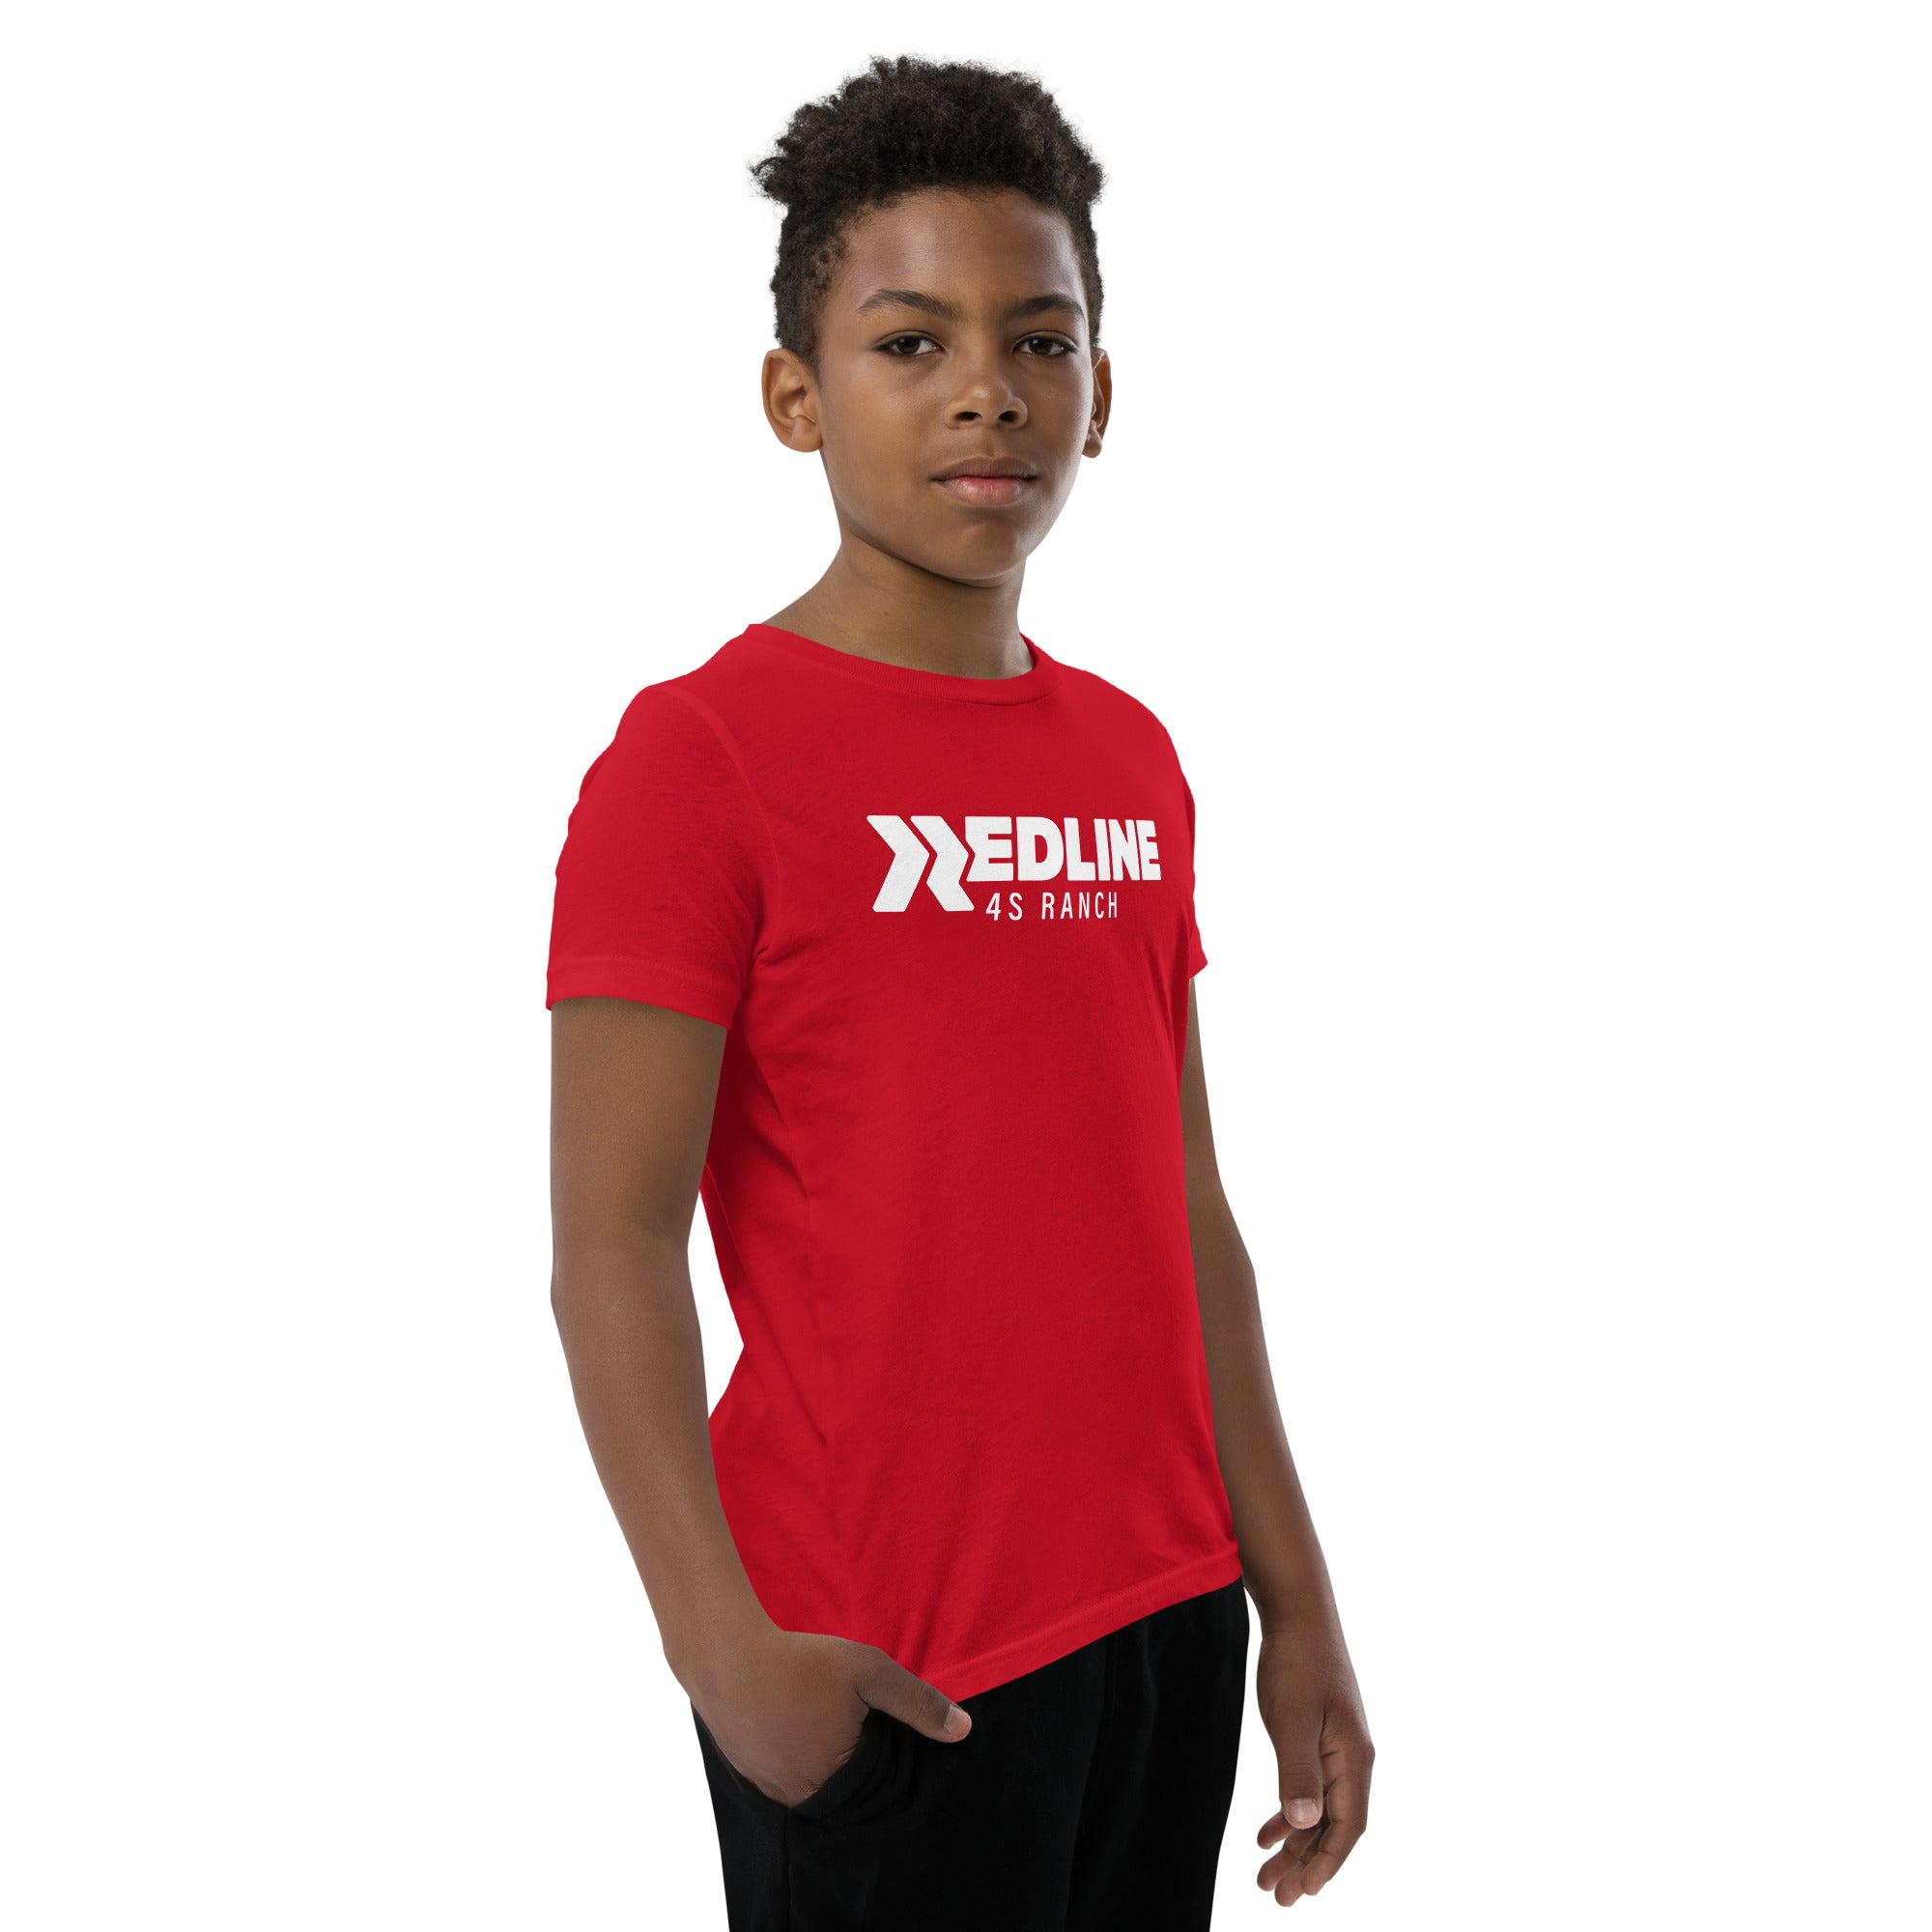 4s Ranch Logo White - Red Youth Short Sleeve T-Shirt